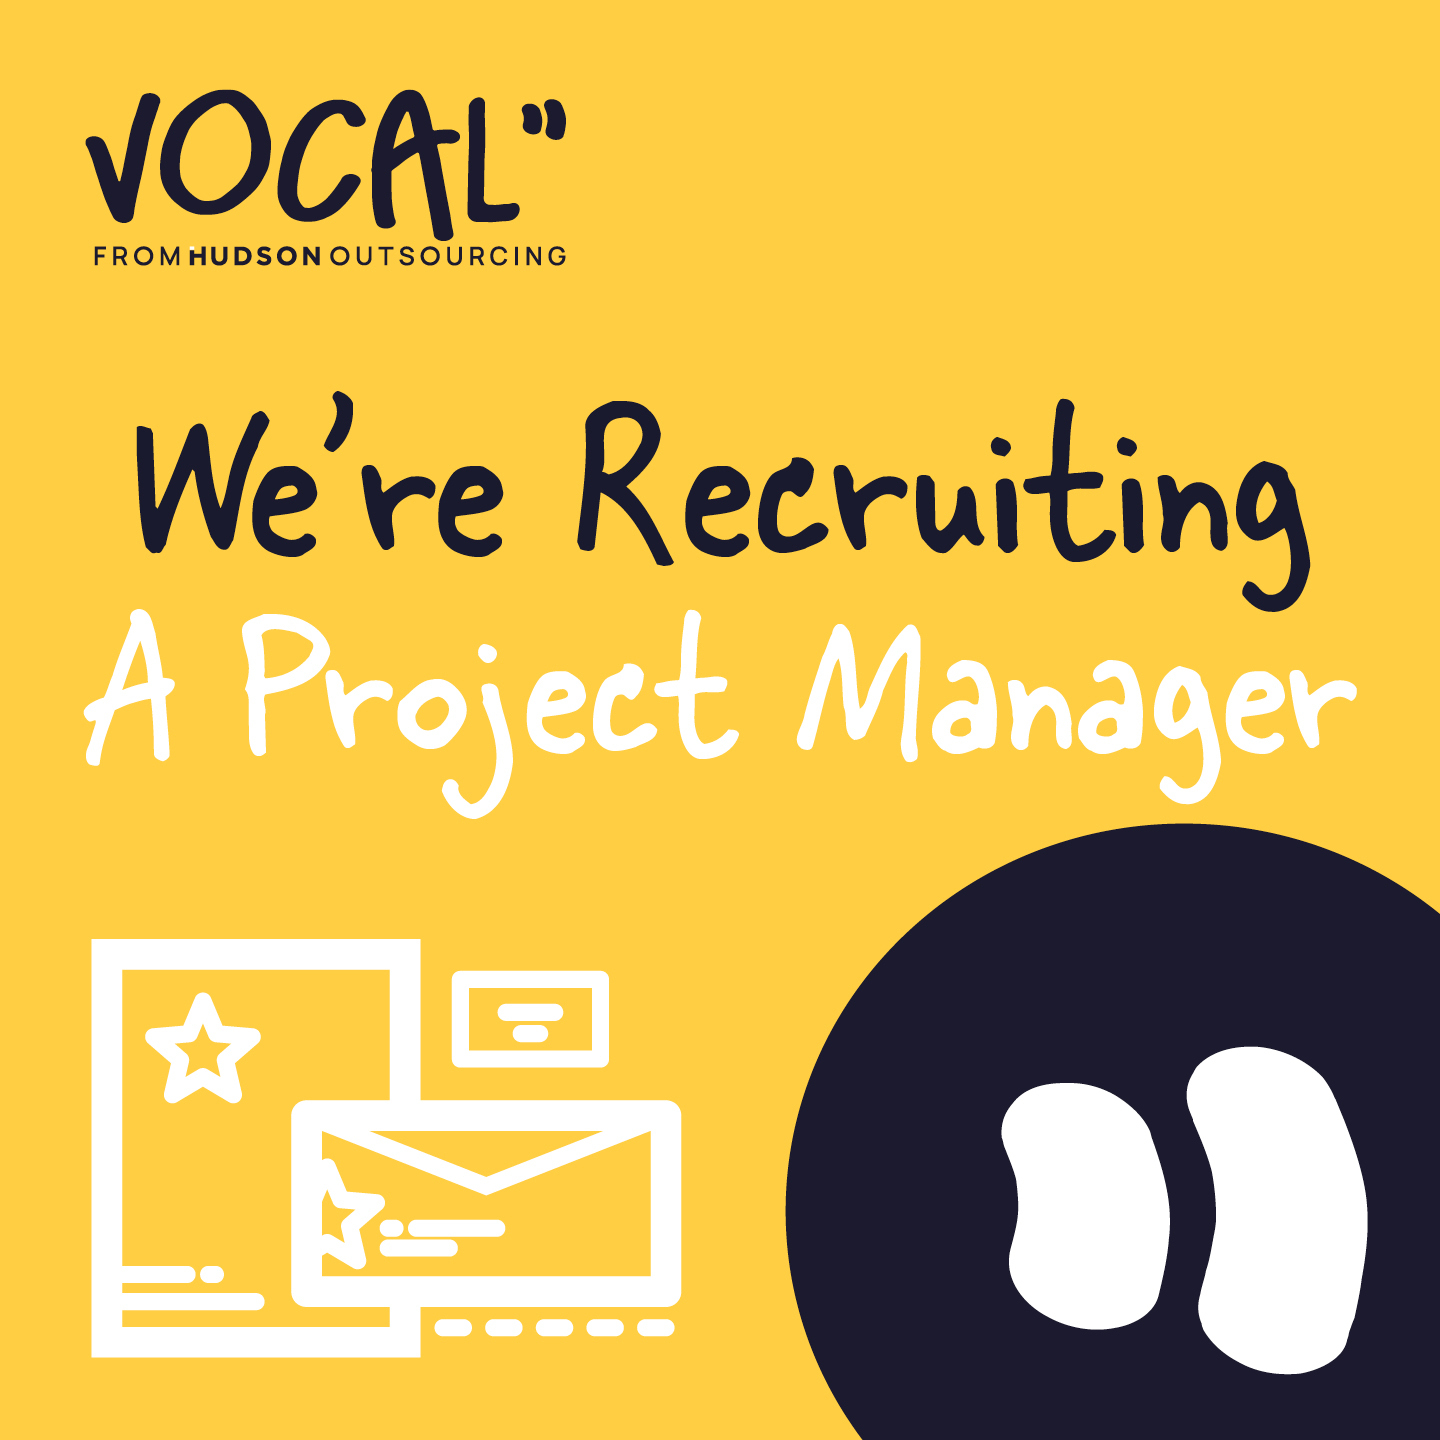 We’re Recruiting a Project Manager